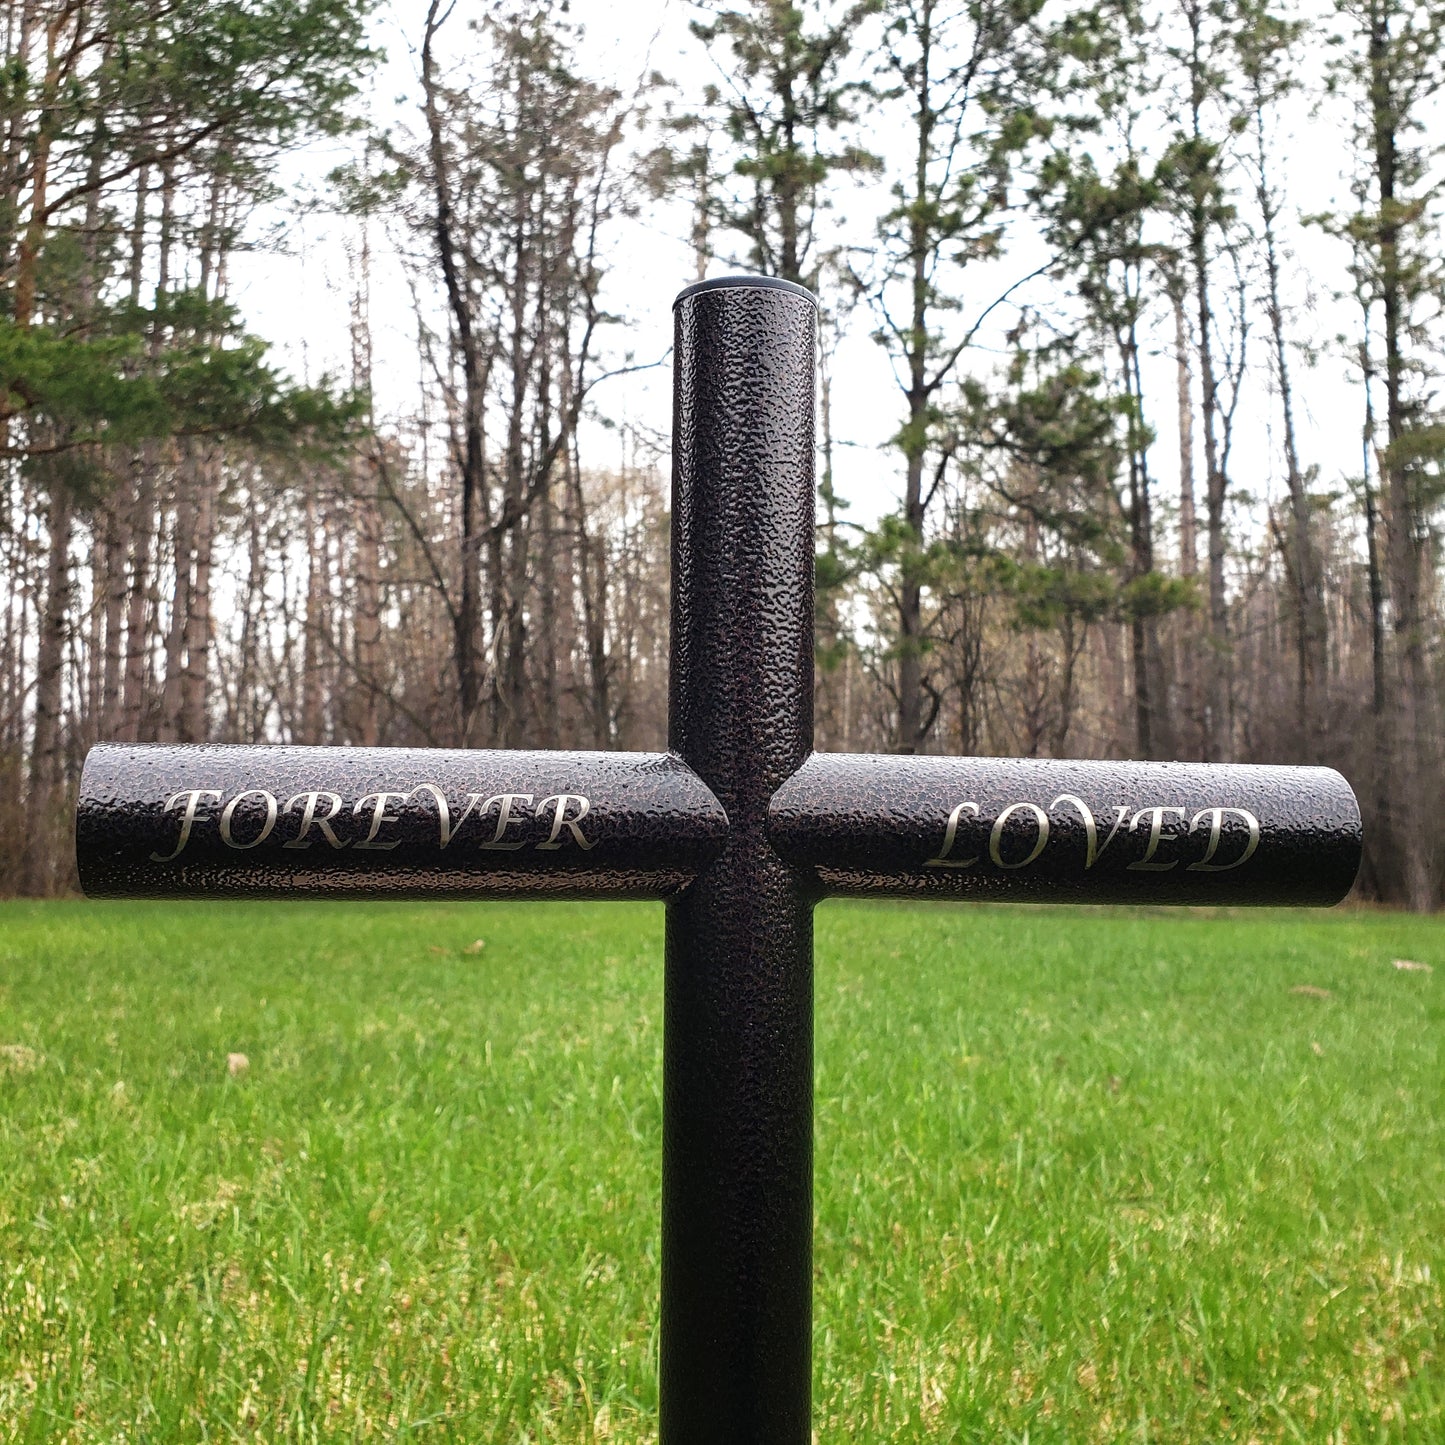 Everlasting Cross Memorial On A Cloudy Day, Can Feel Sad, Like the Lost Of Our Loved One. On A Sunny Day We Remember the Warmth Of Their Memories. Uniquely Engrave and Remember Your Family Member Forever